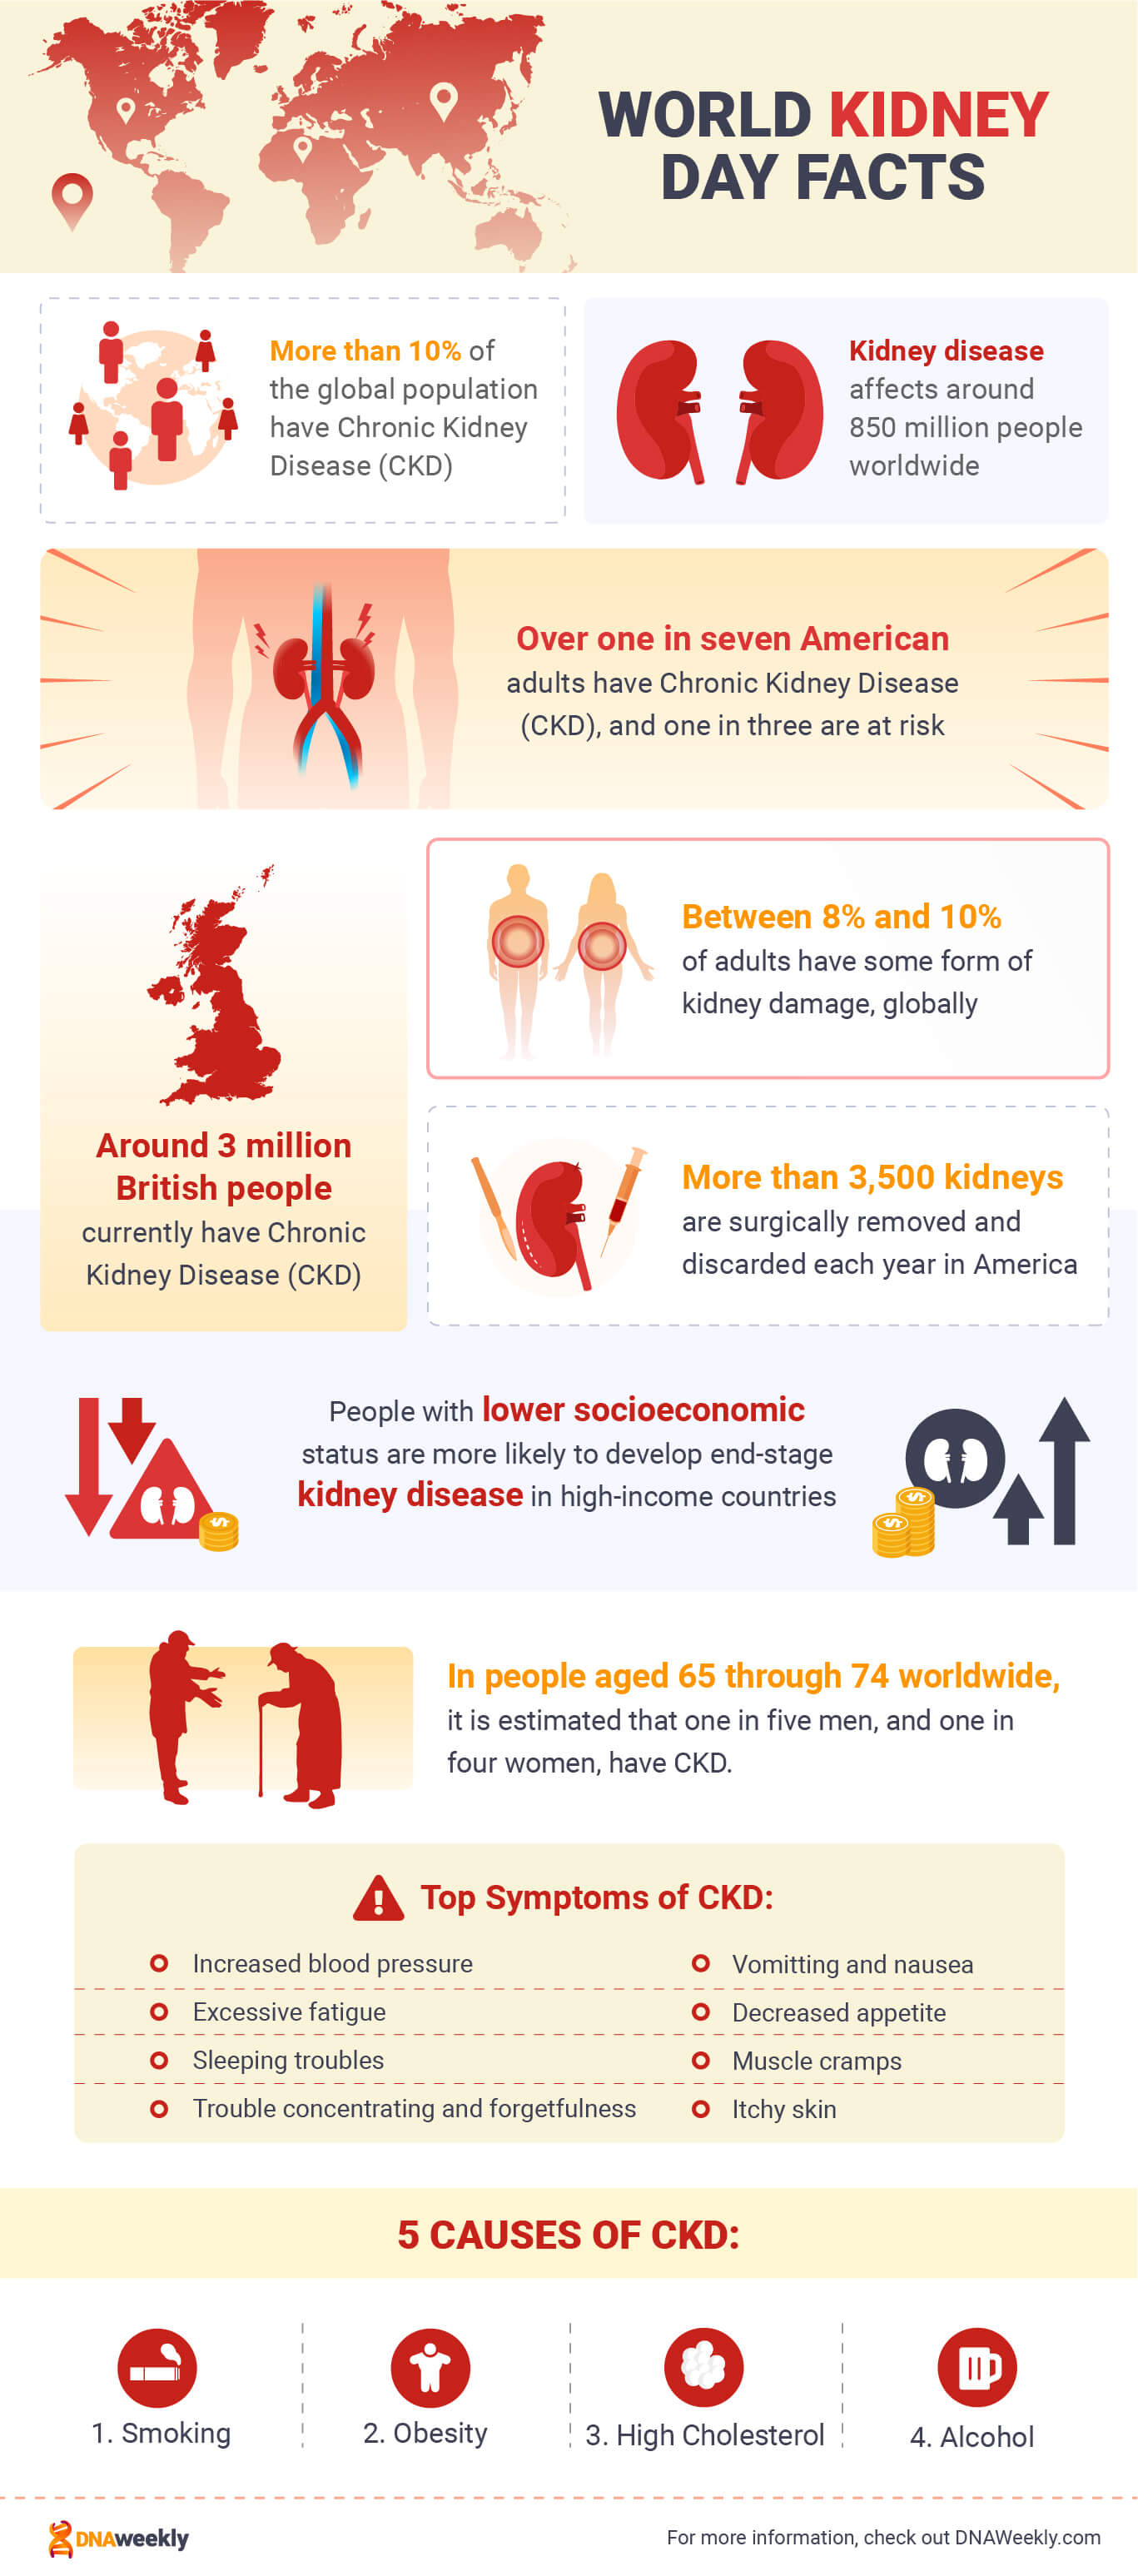 World Kidney Day 2023 What Should You Be Aware Of?